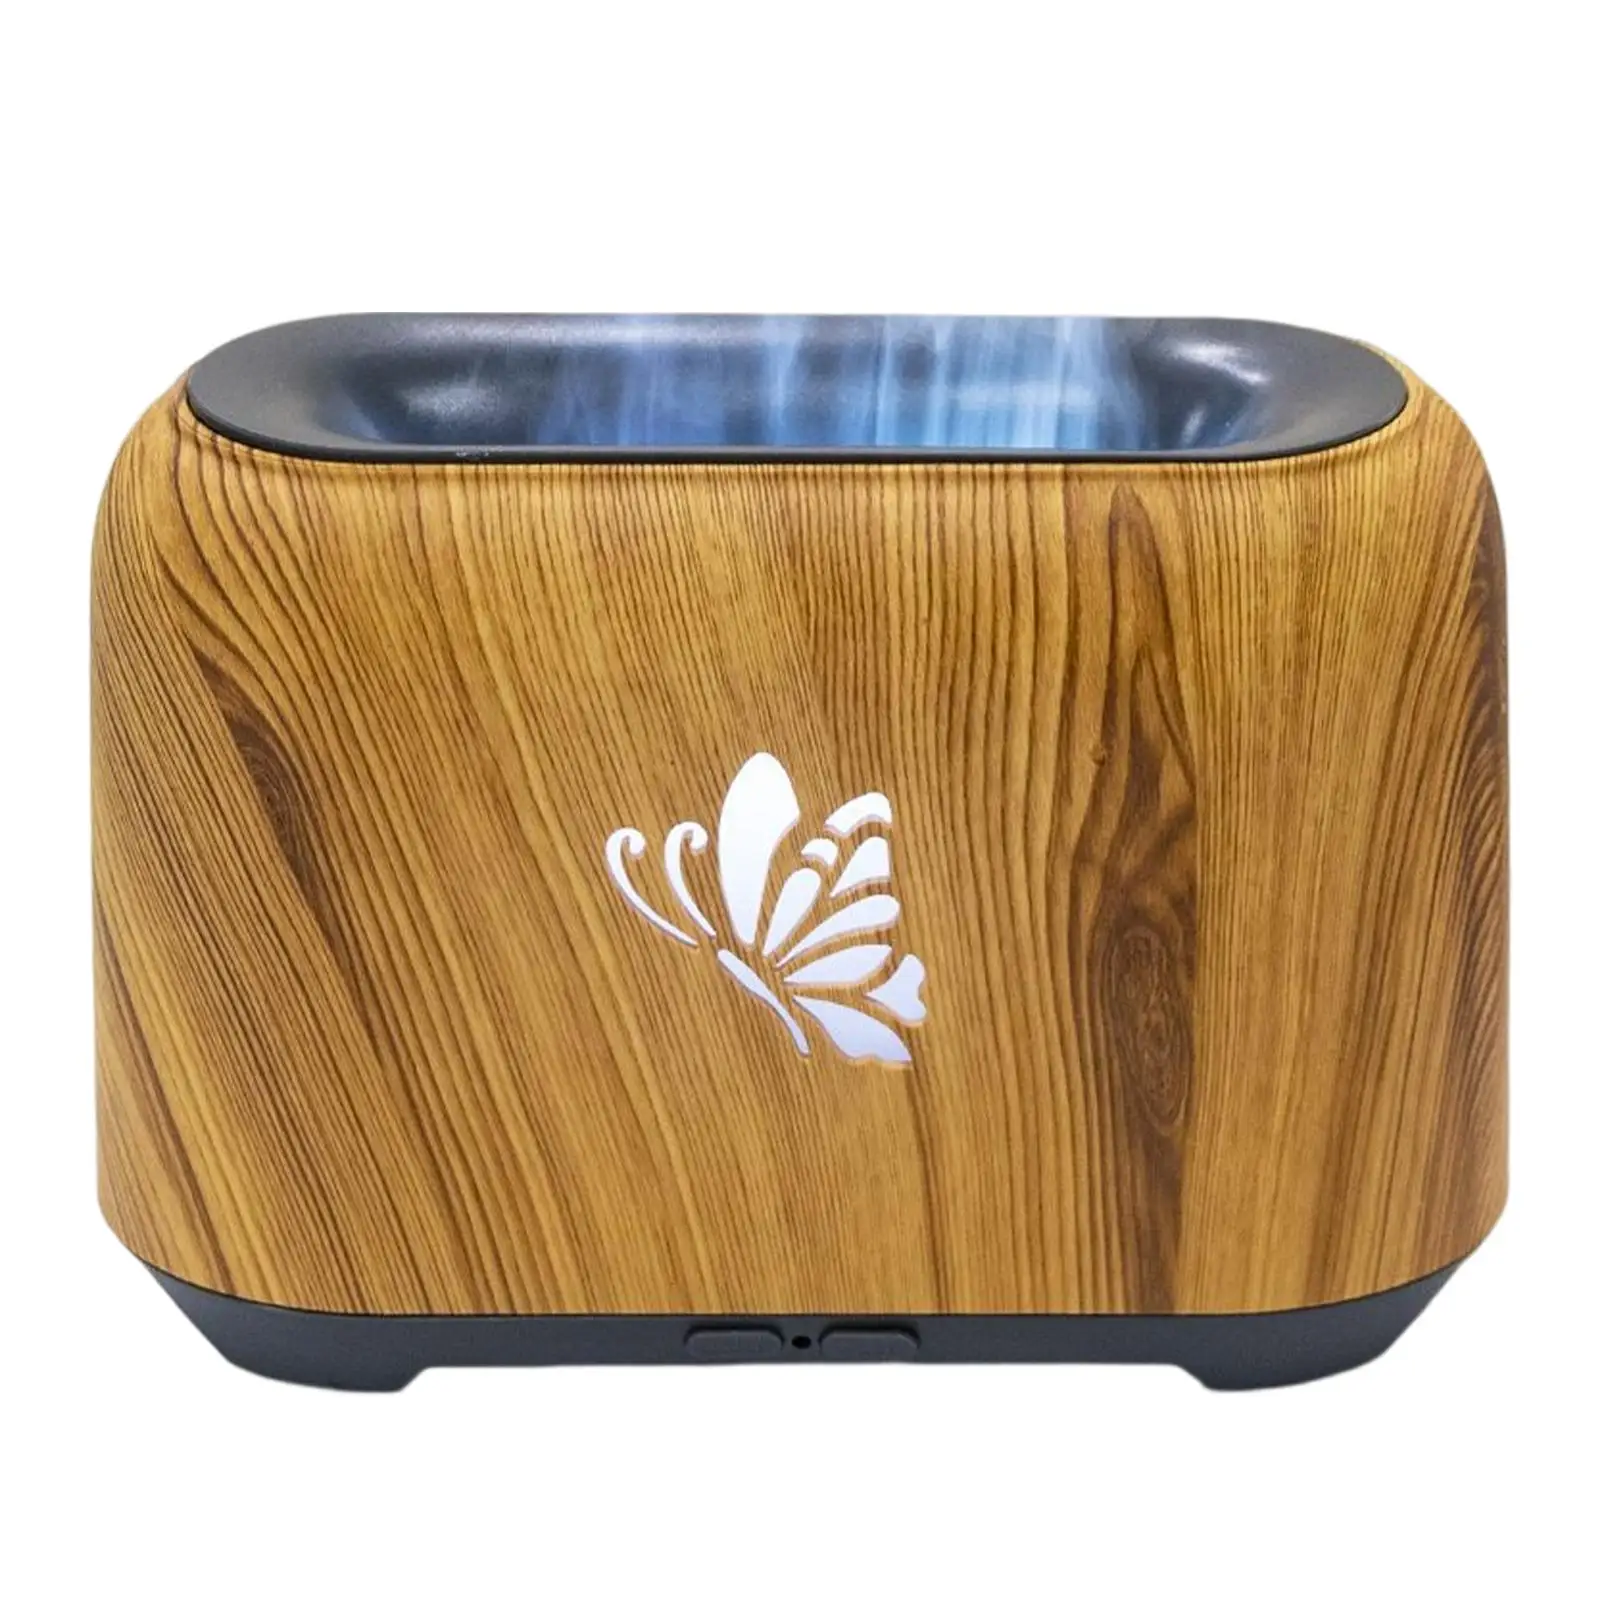 Essential Oil Diffuser with flame Aroma Diffuser Nightlight Scent Diffuser Time Setting Humidifier for Home Office Bedroom